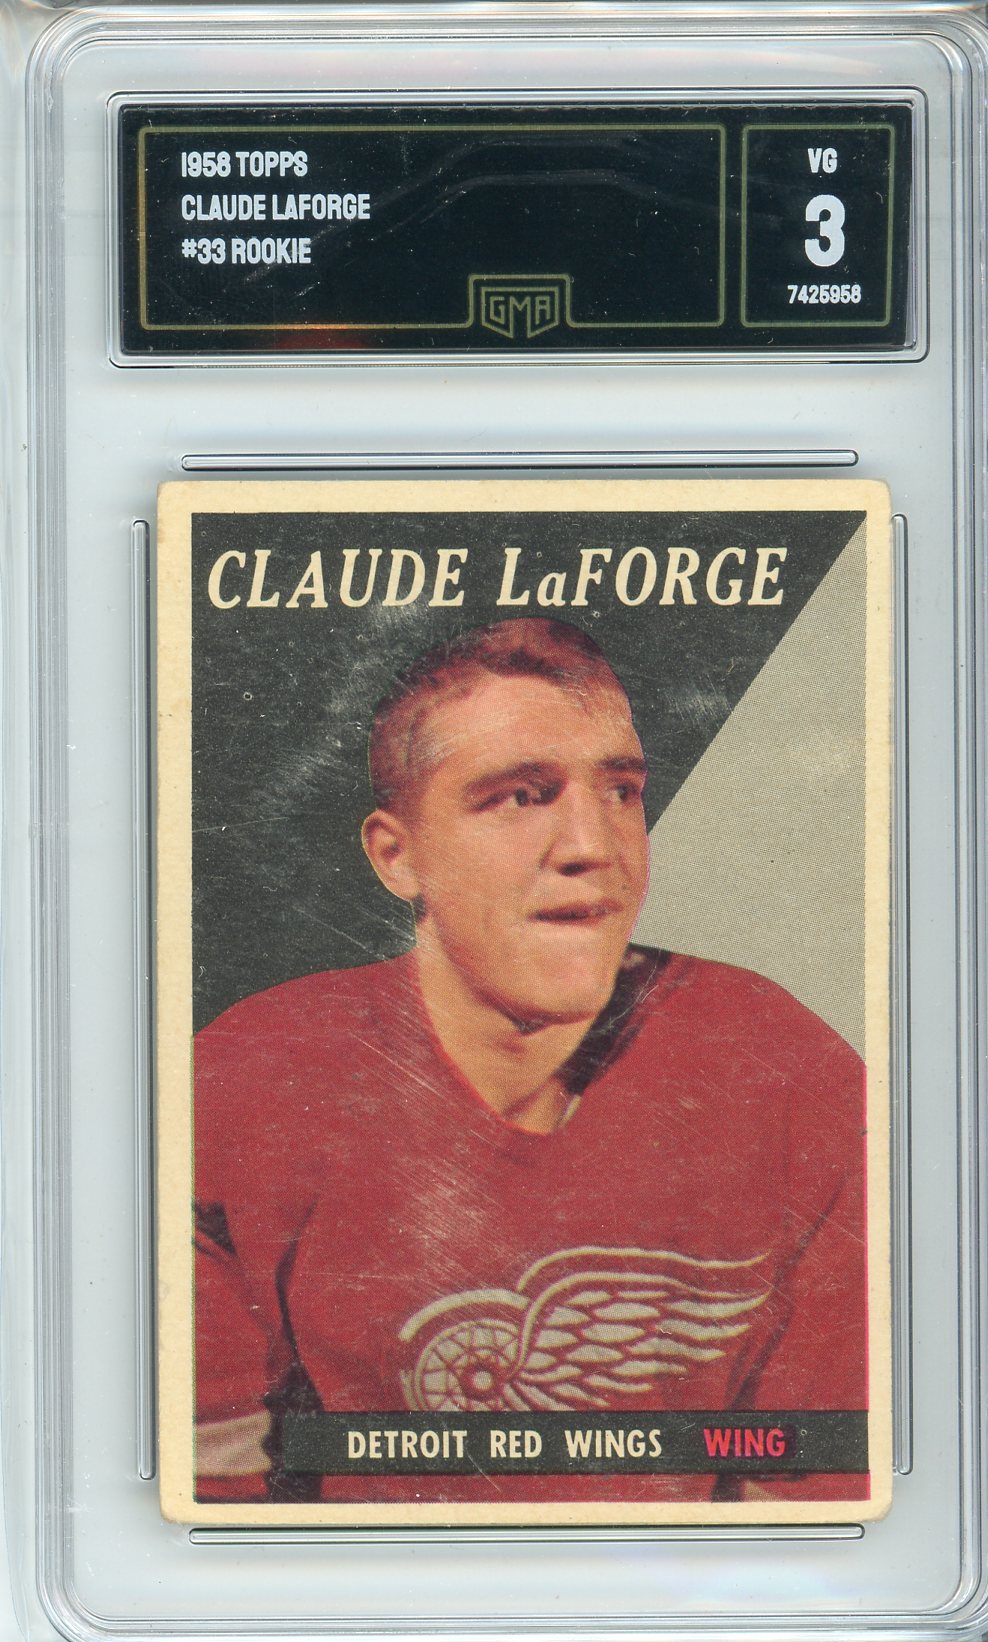 1958 Topps Claude LaForge #33 Rookie Card GMA 3